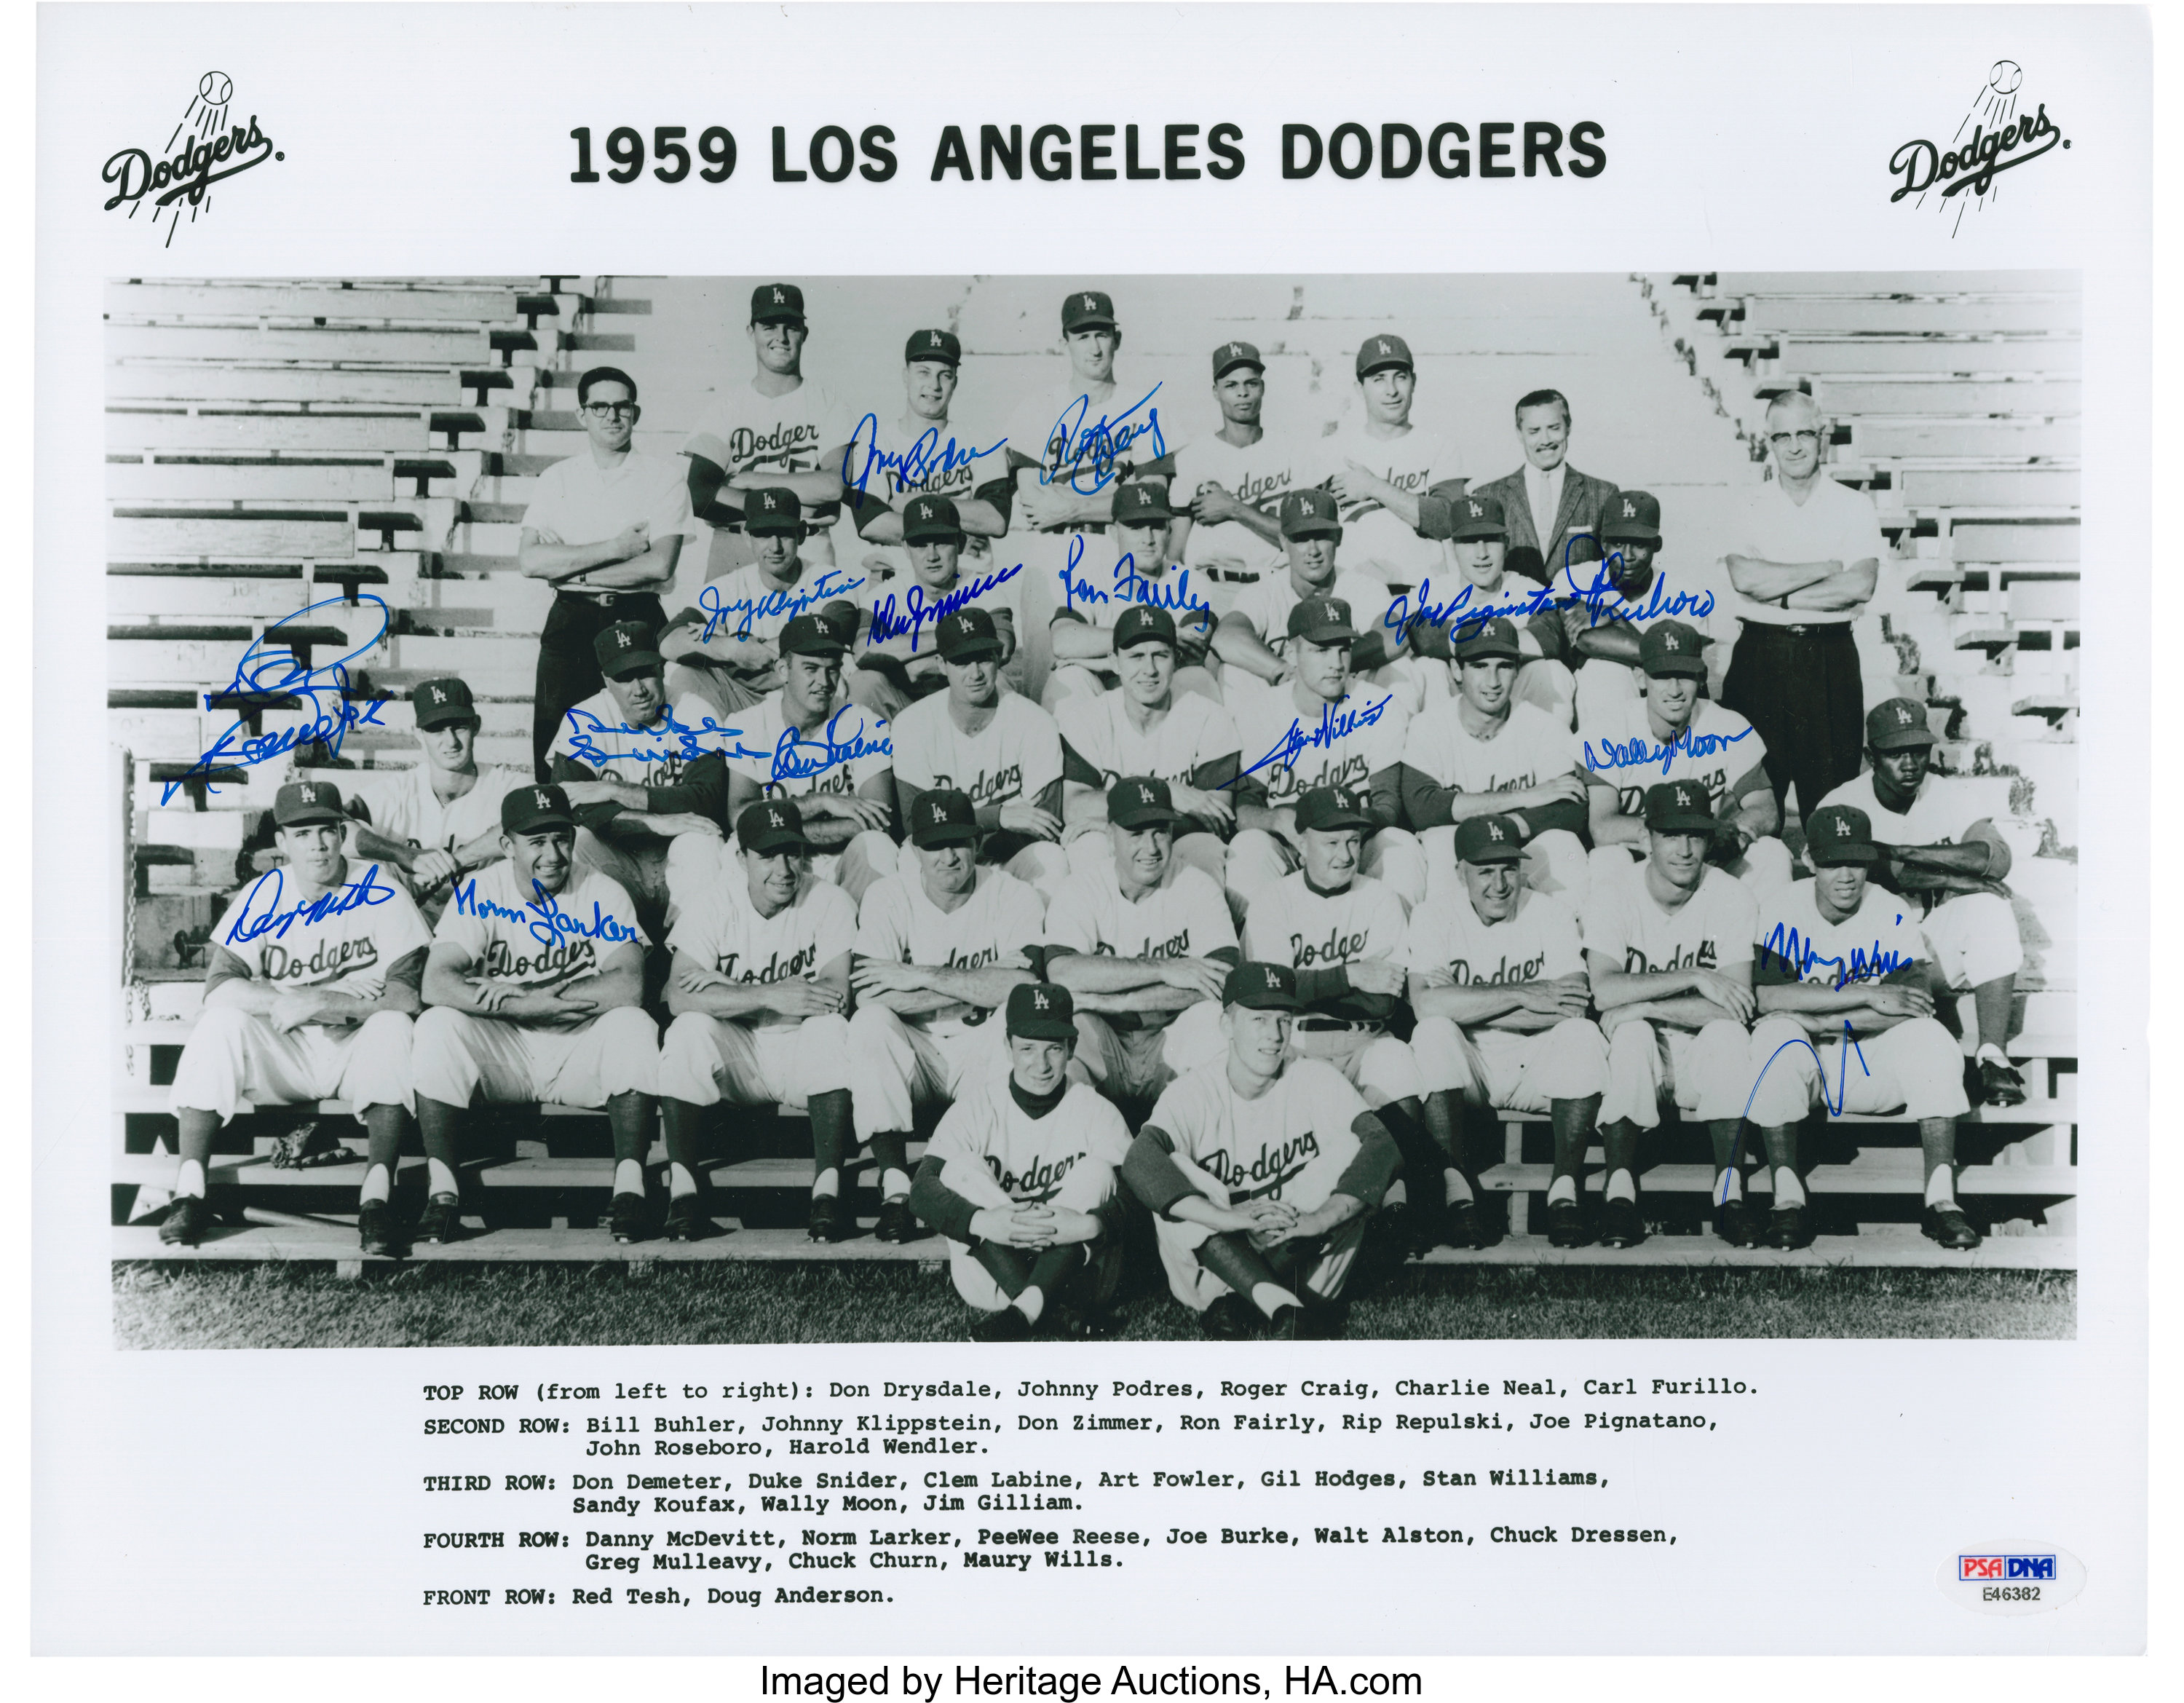 Queens Theatre - The 1955 Brooklyn Dodgers roster included